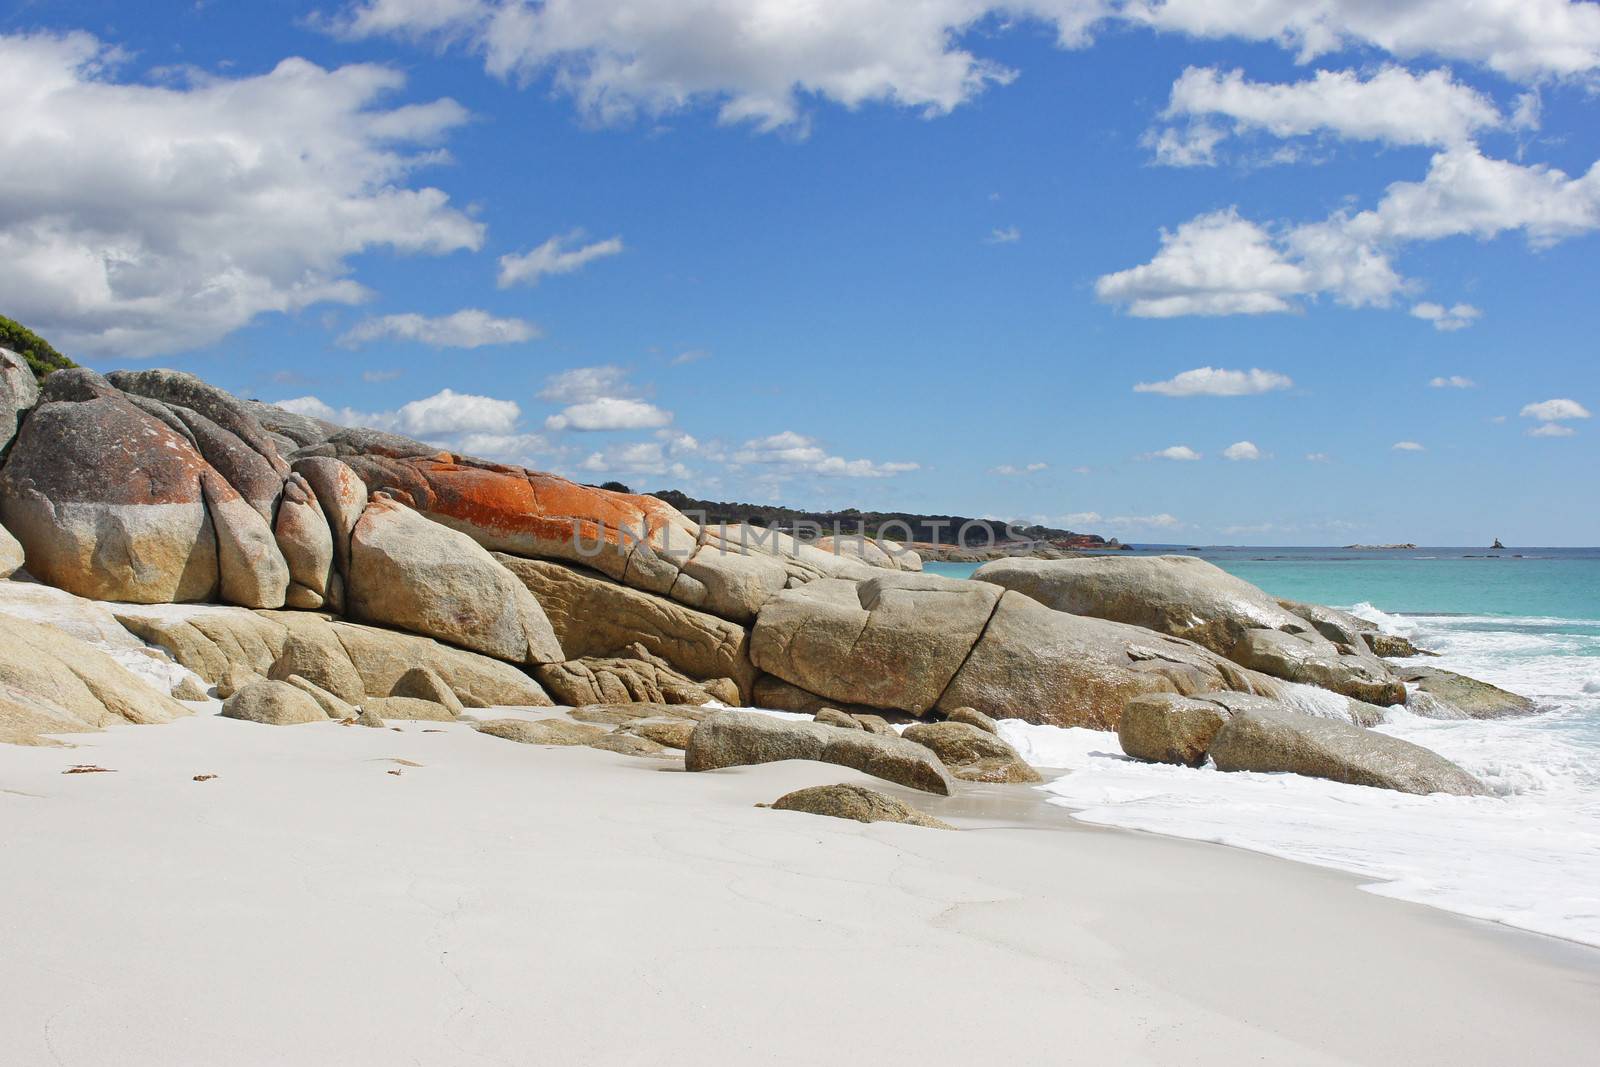 Bay of Fires, one of the most beautiful beaches of the world. Tasmania, Australia